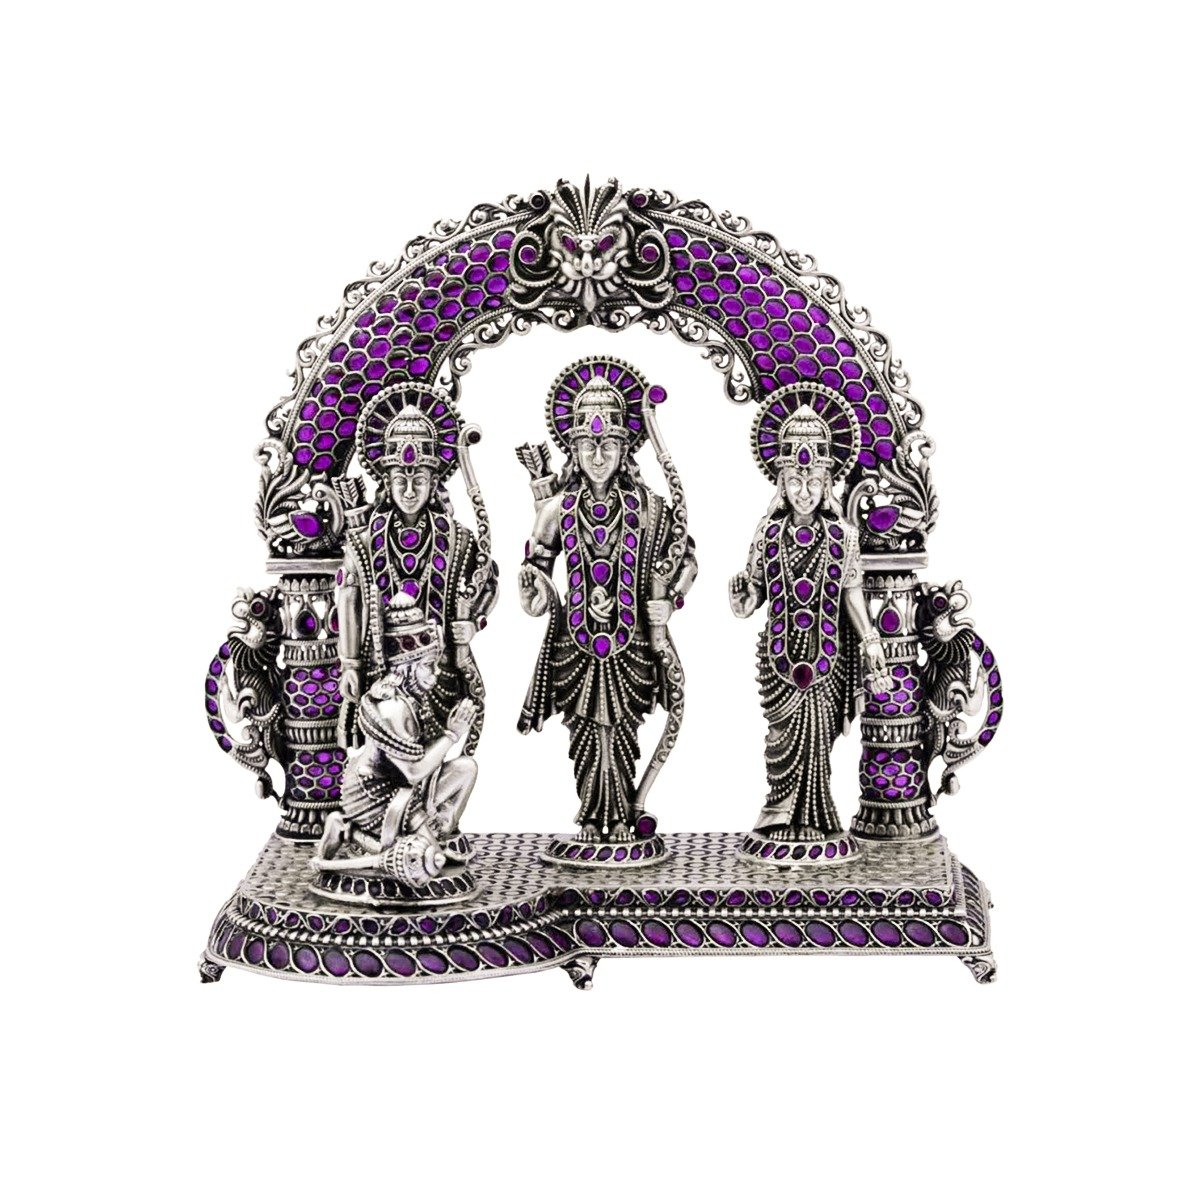 92.5 SILVER RAMA PATTABHISHEKAM IDOL STUDDED WITH RED SPINAL STONES